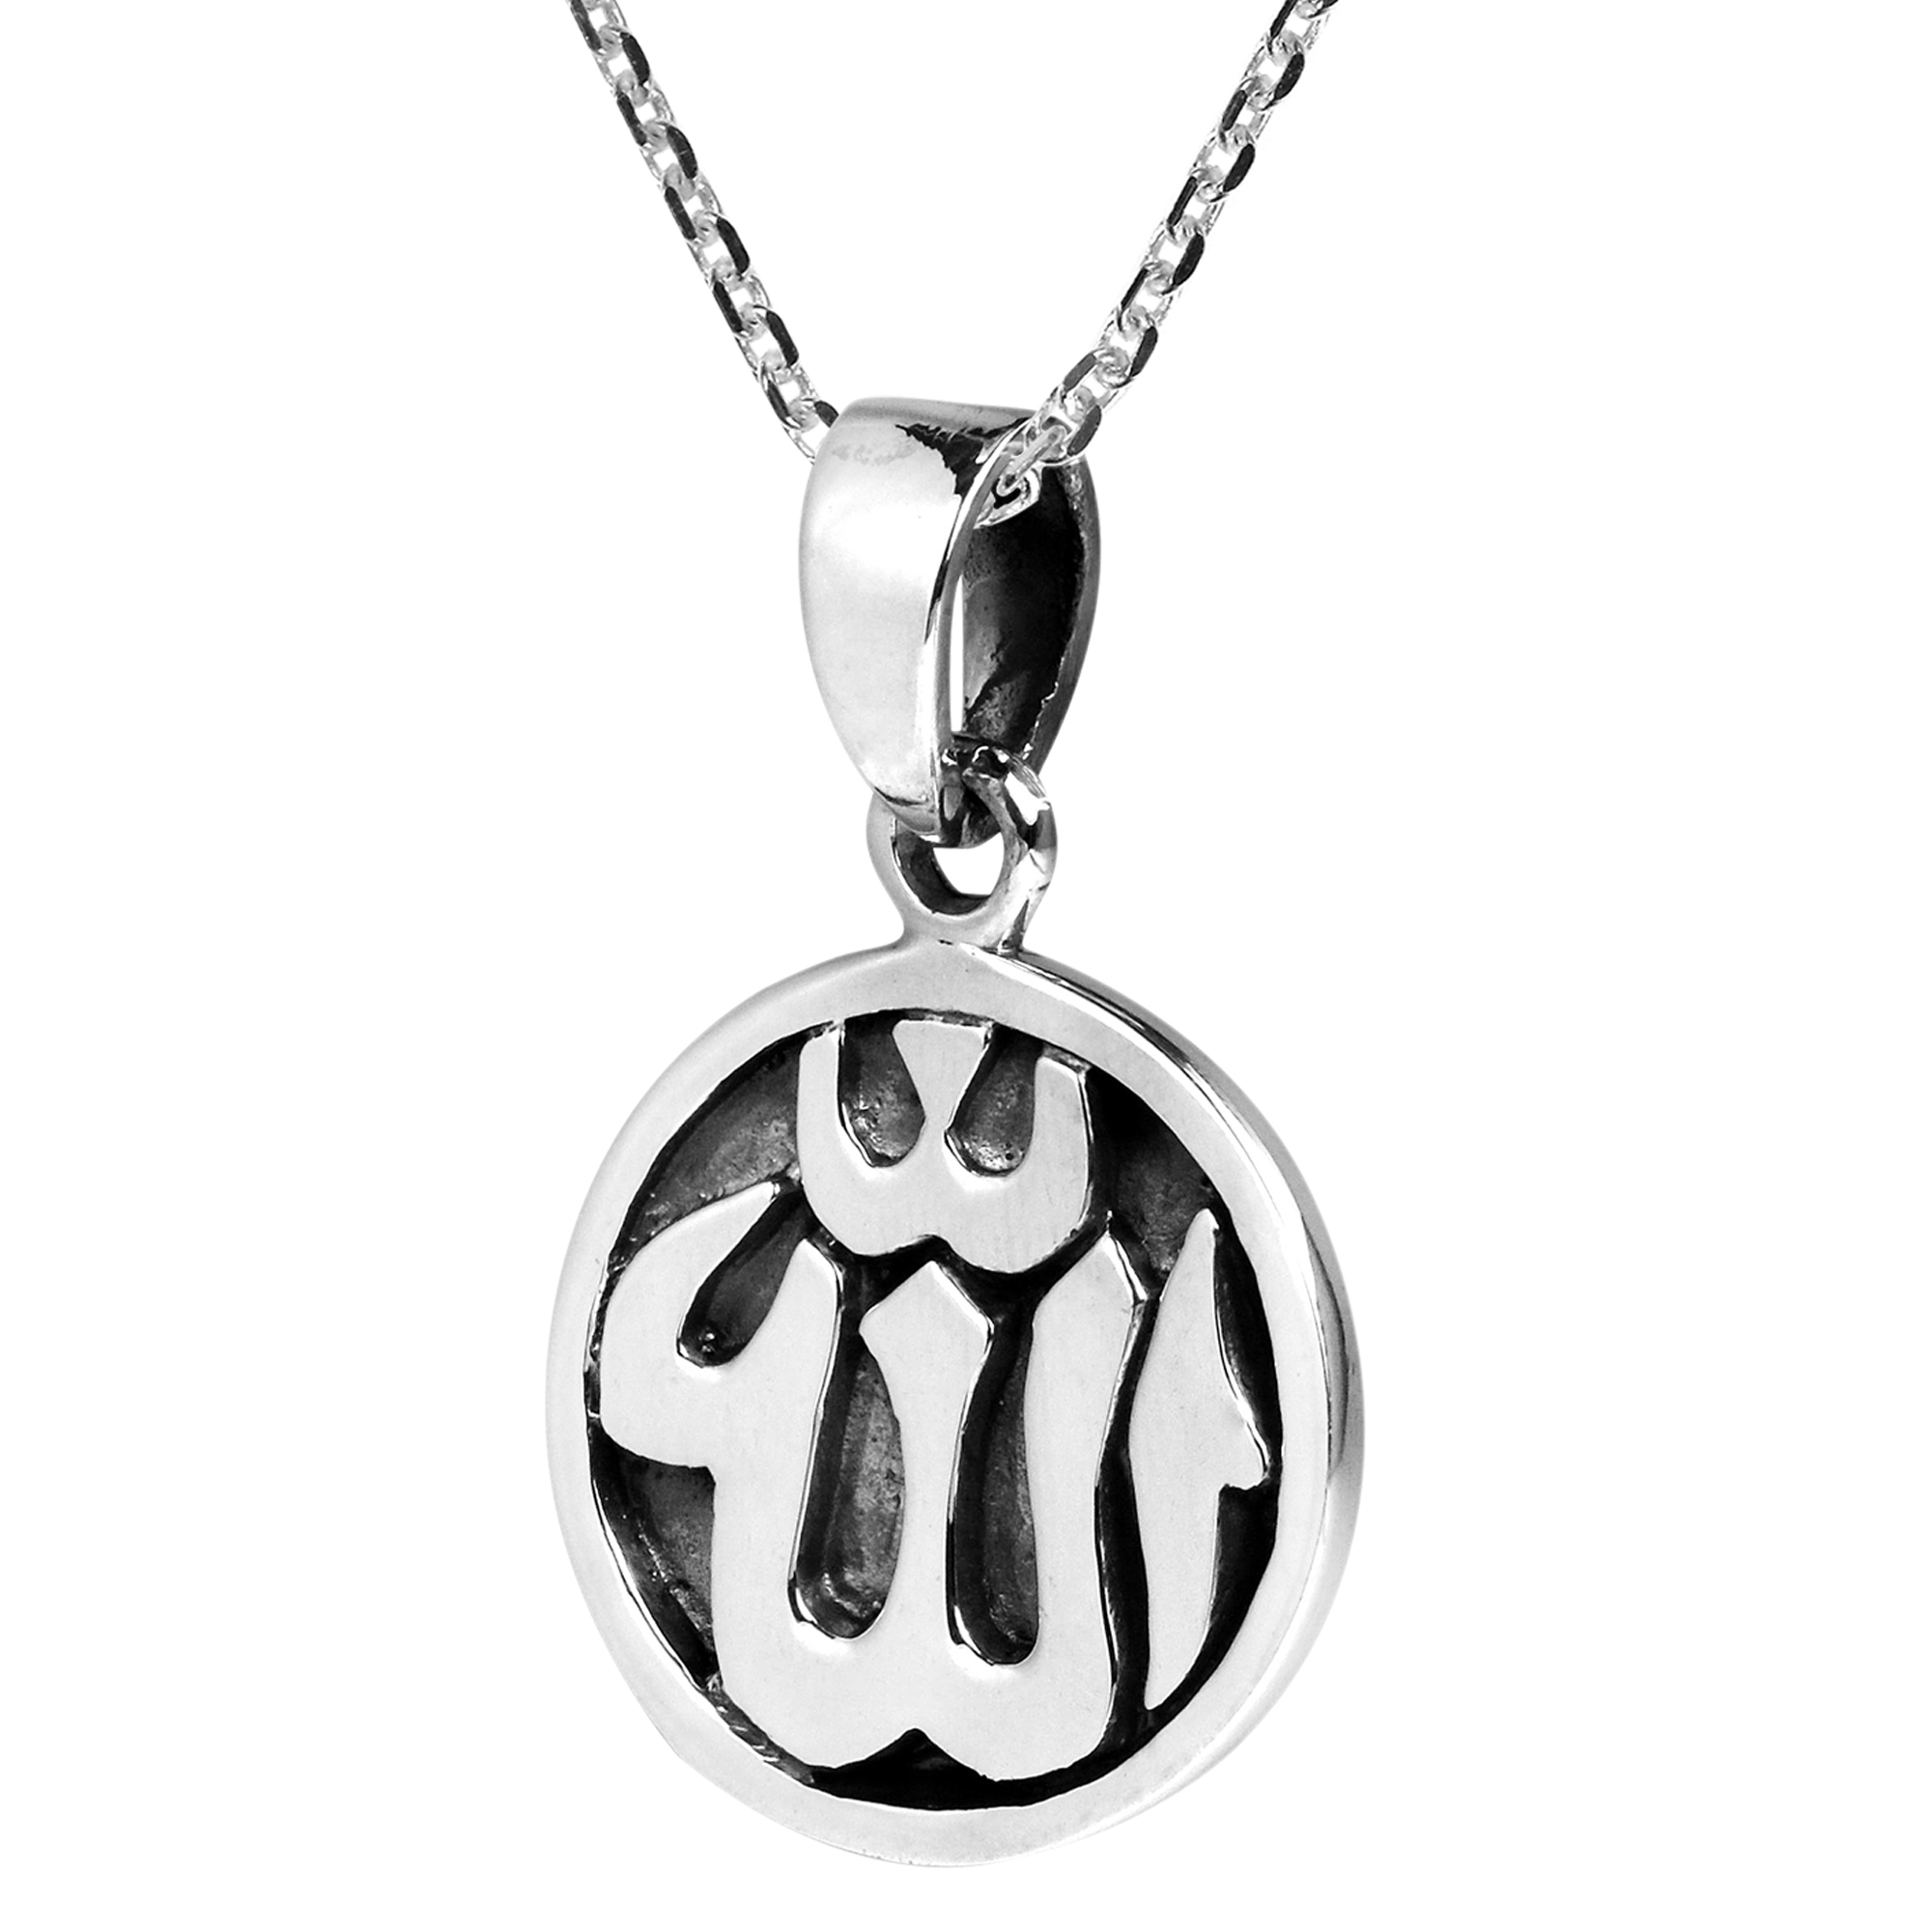 Round Allah Symbol/ Islamic God .925 Sterling Silver Necklace